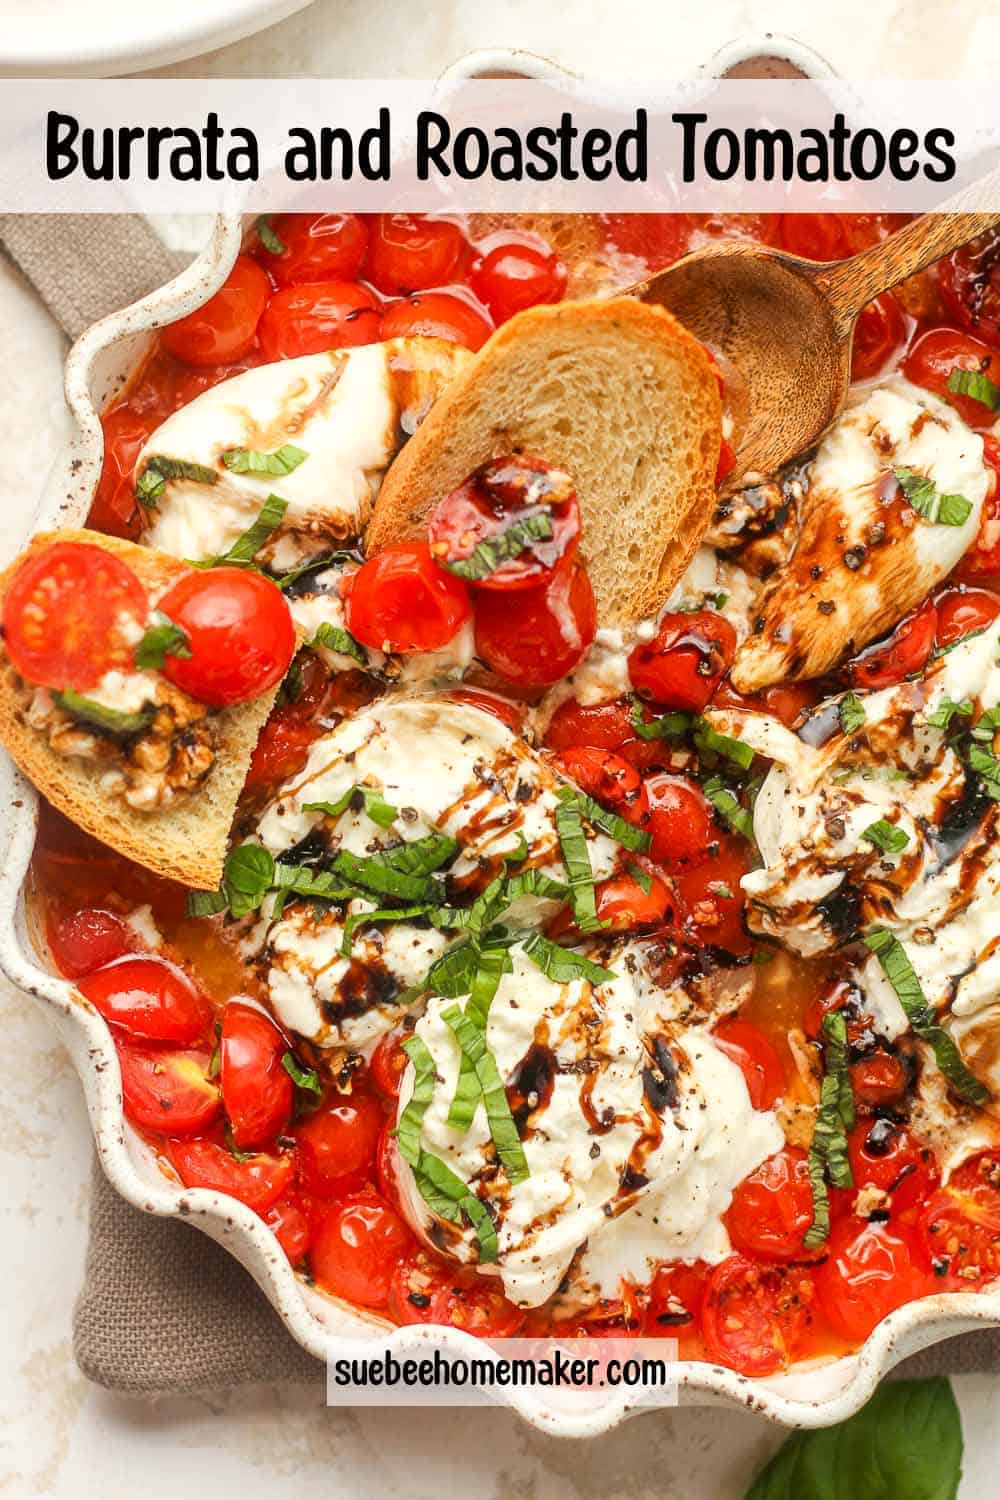 A dish of burrata and roasted tomatoes with toasted bread.